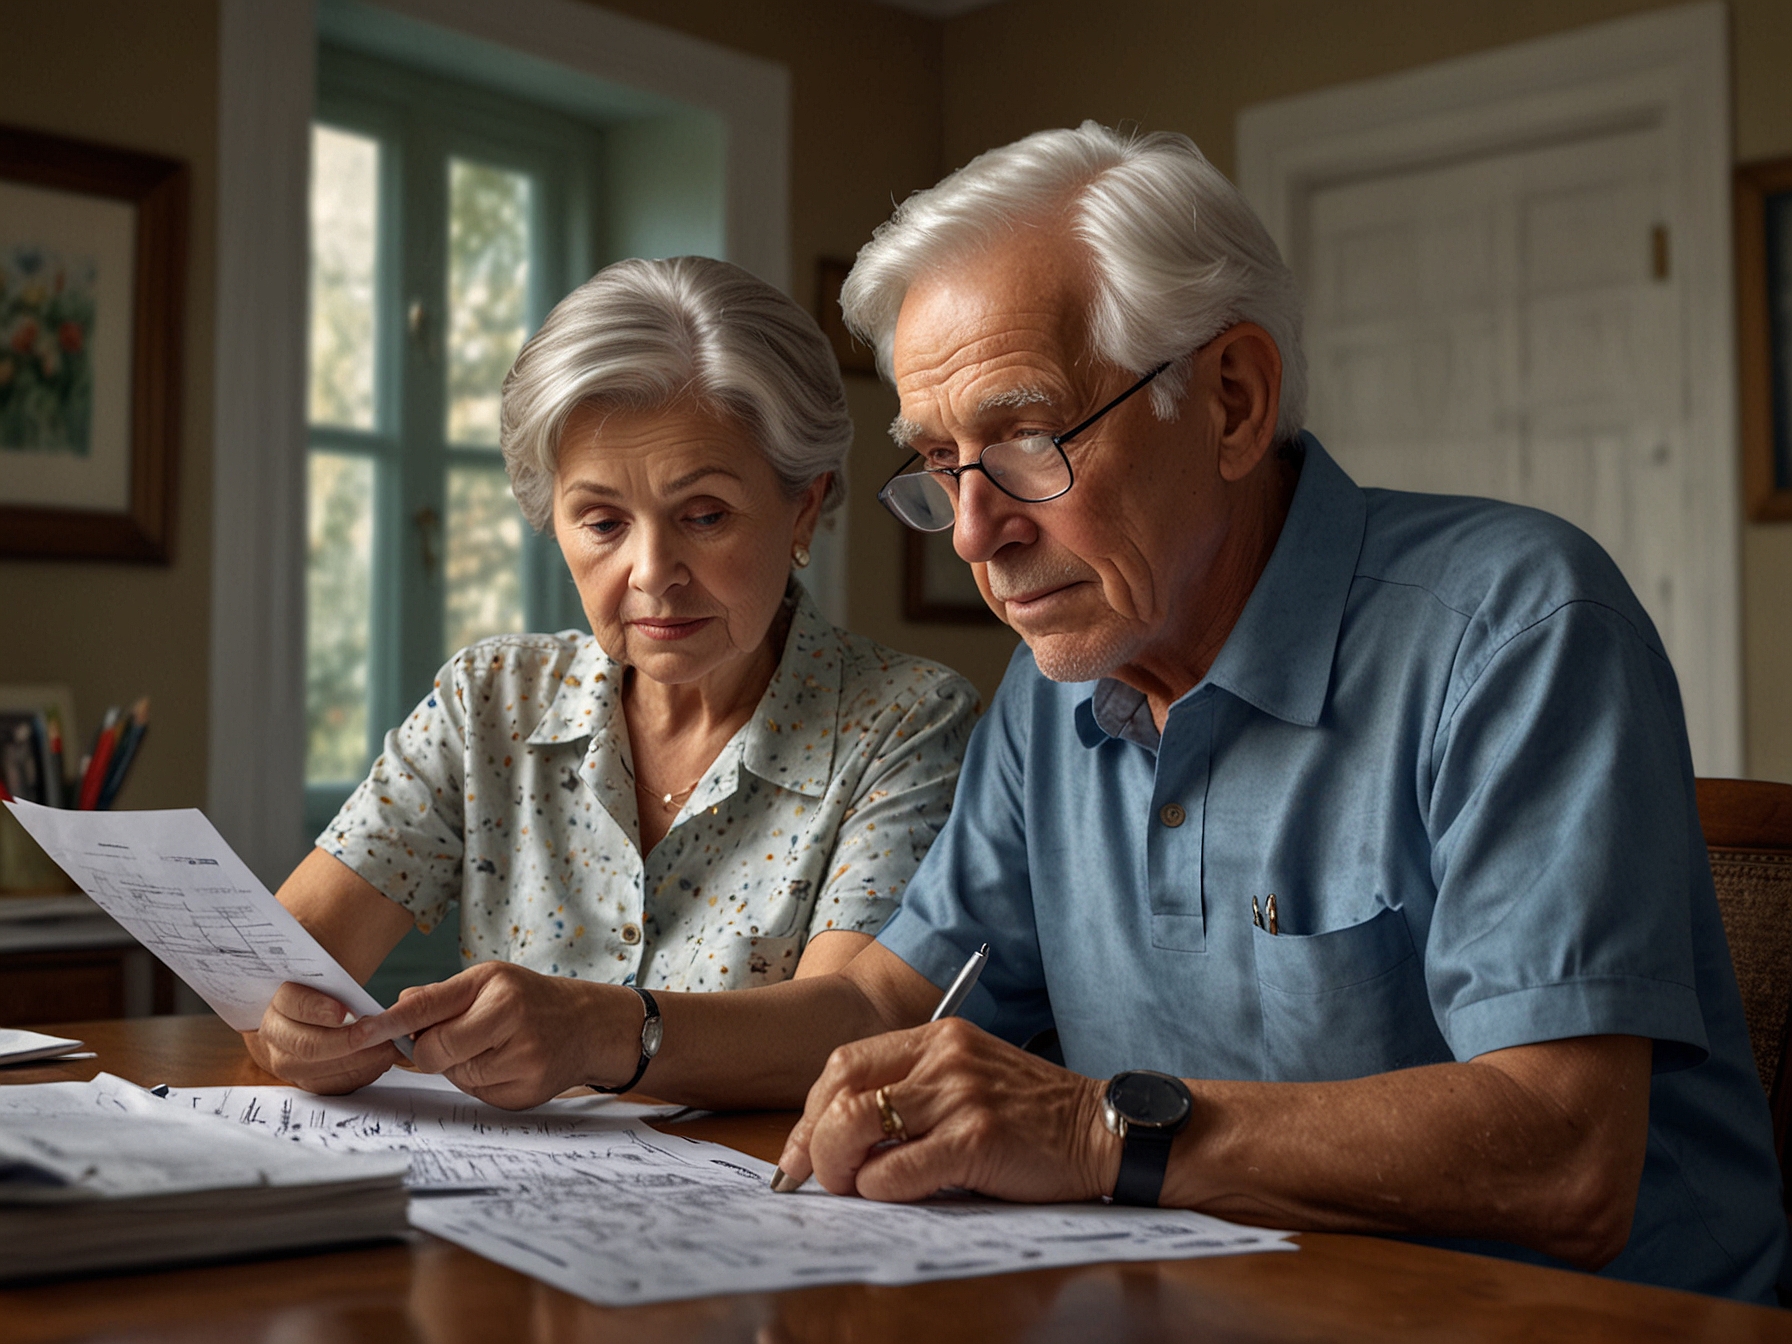 An elderly couple reviewing their financial documents and Social Security statement, highlighting the challenges of early retirement at age 62 and the need for additional income sources.